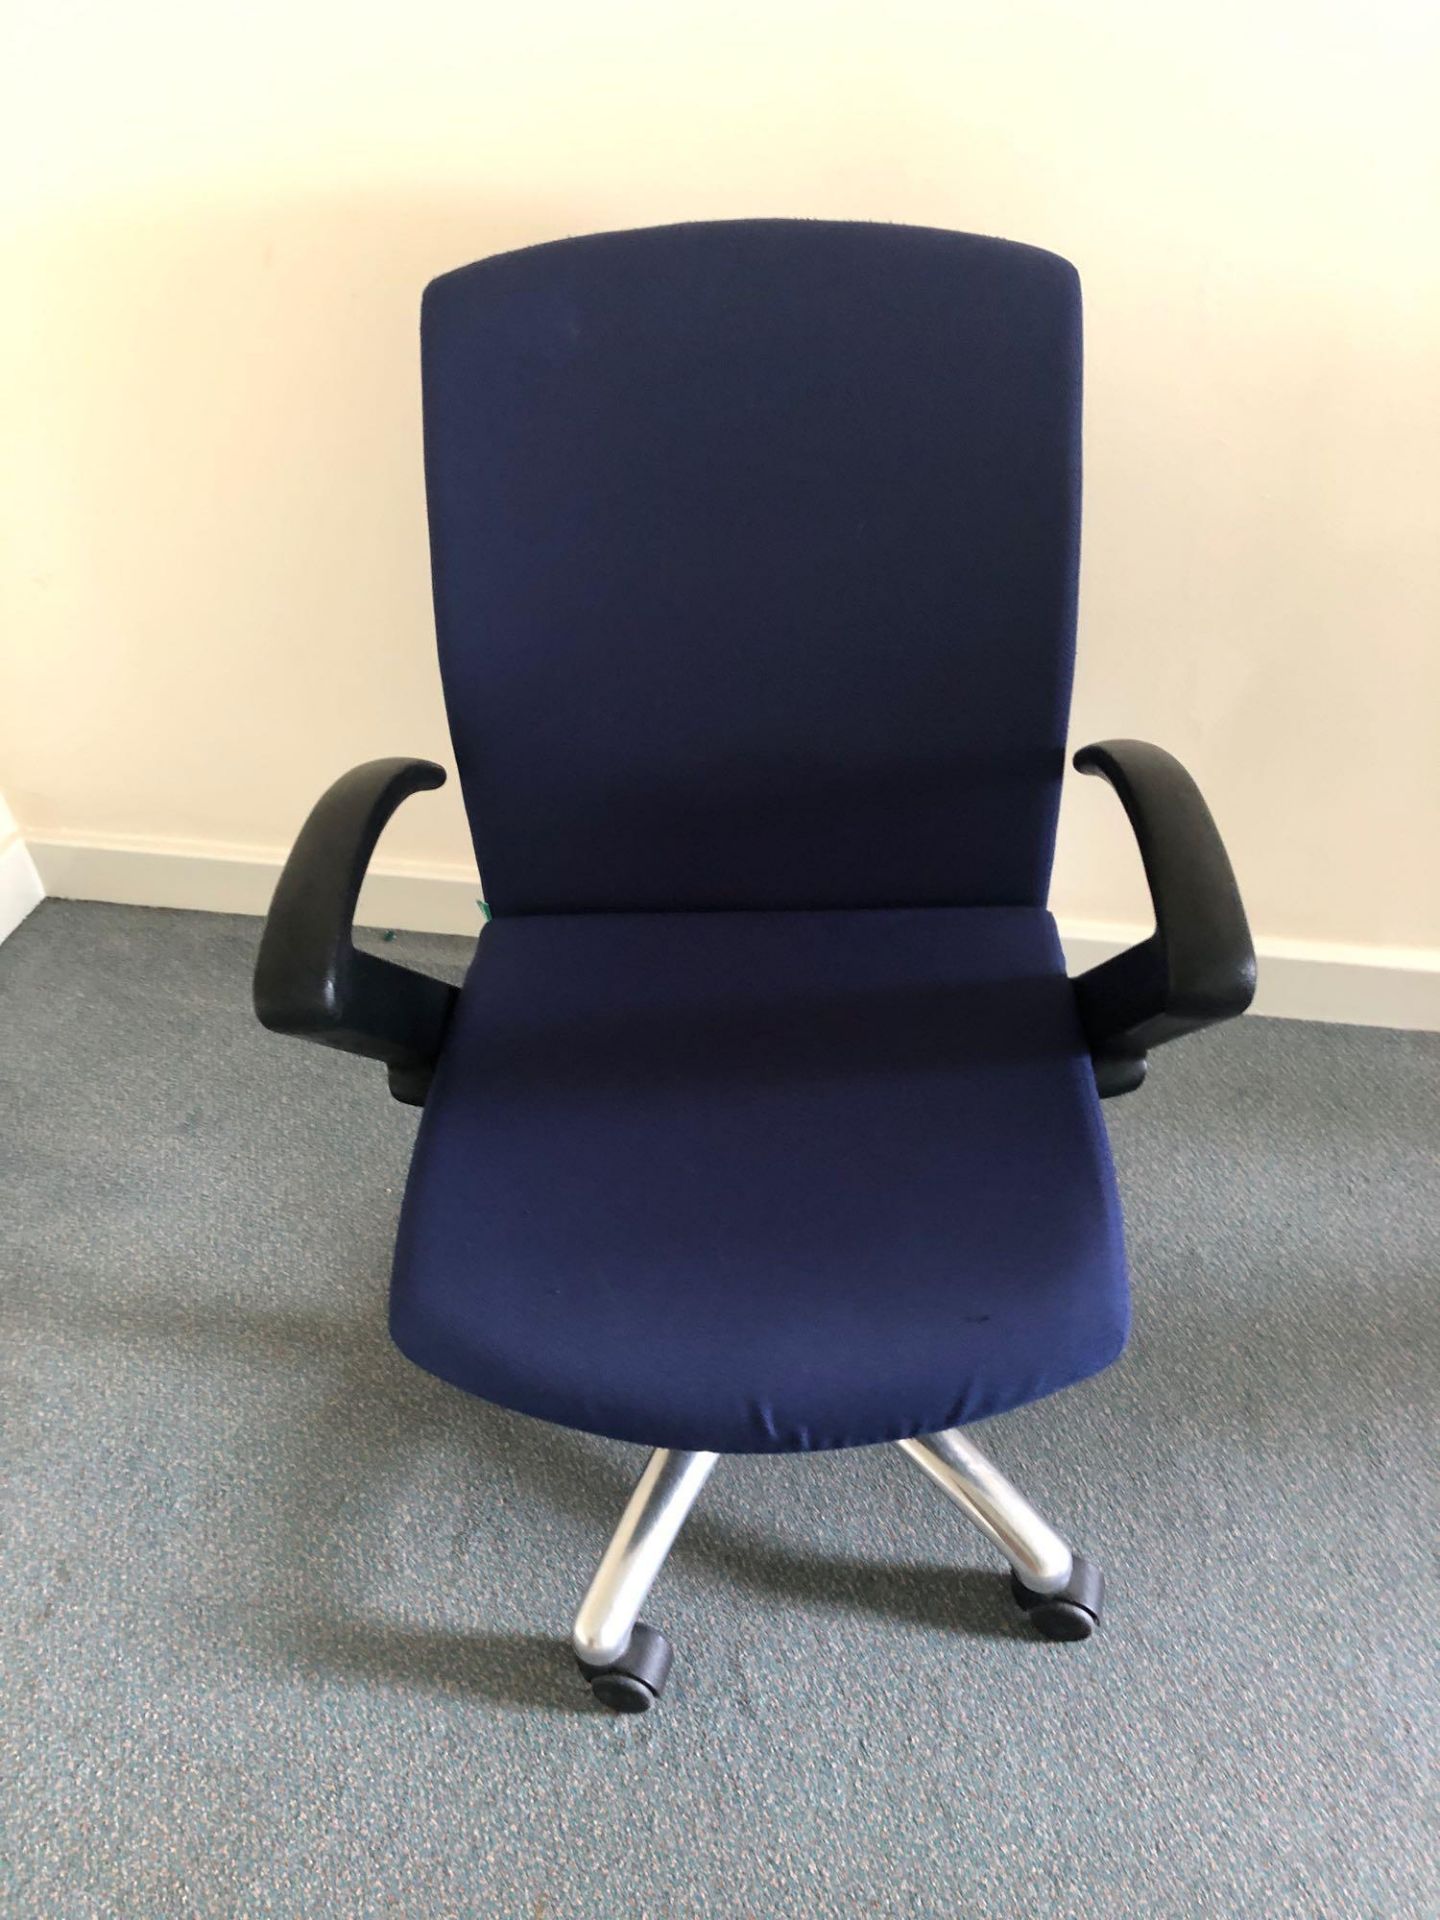 10 X Franch Adjustable Swivel Chairs On Wheels - Image 2 of 2